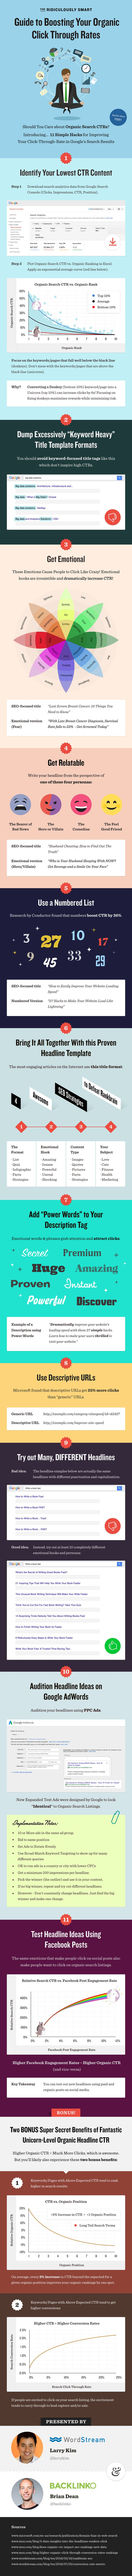 organic-seo-ctr-infographic.png (1160×22640)